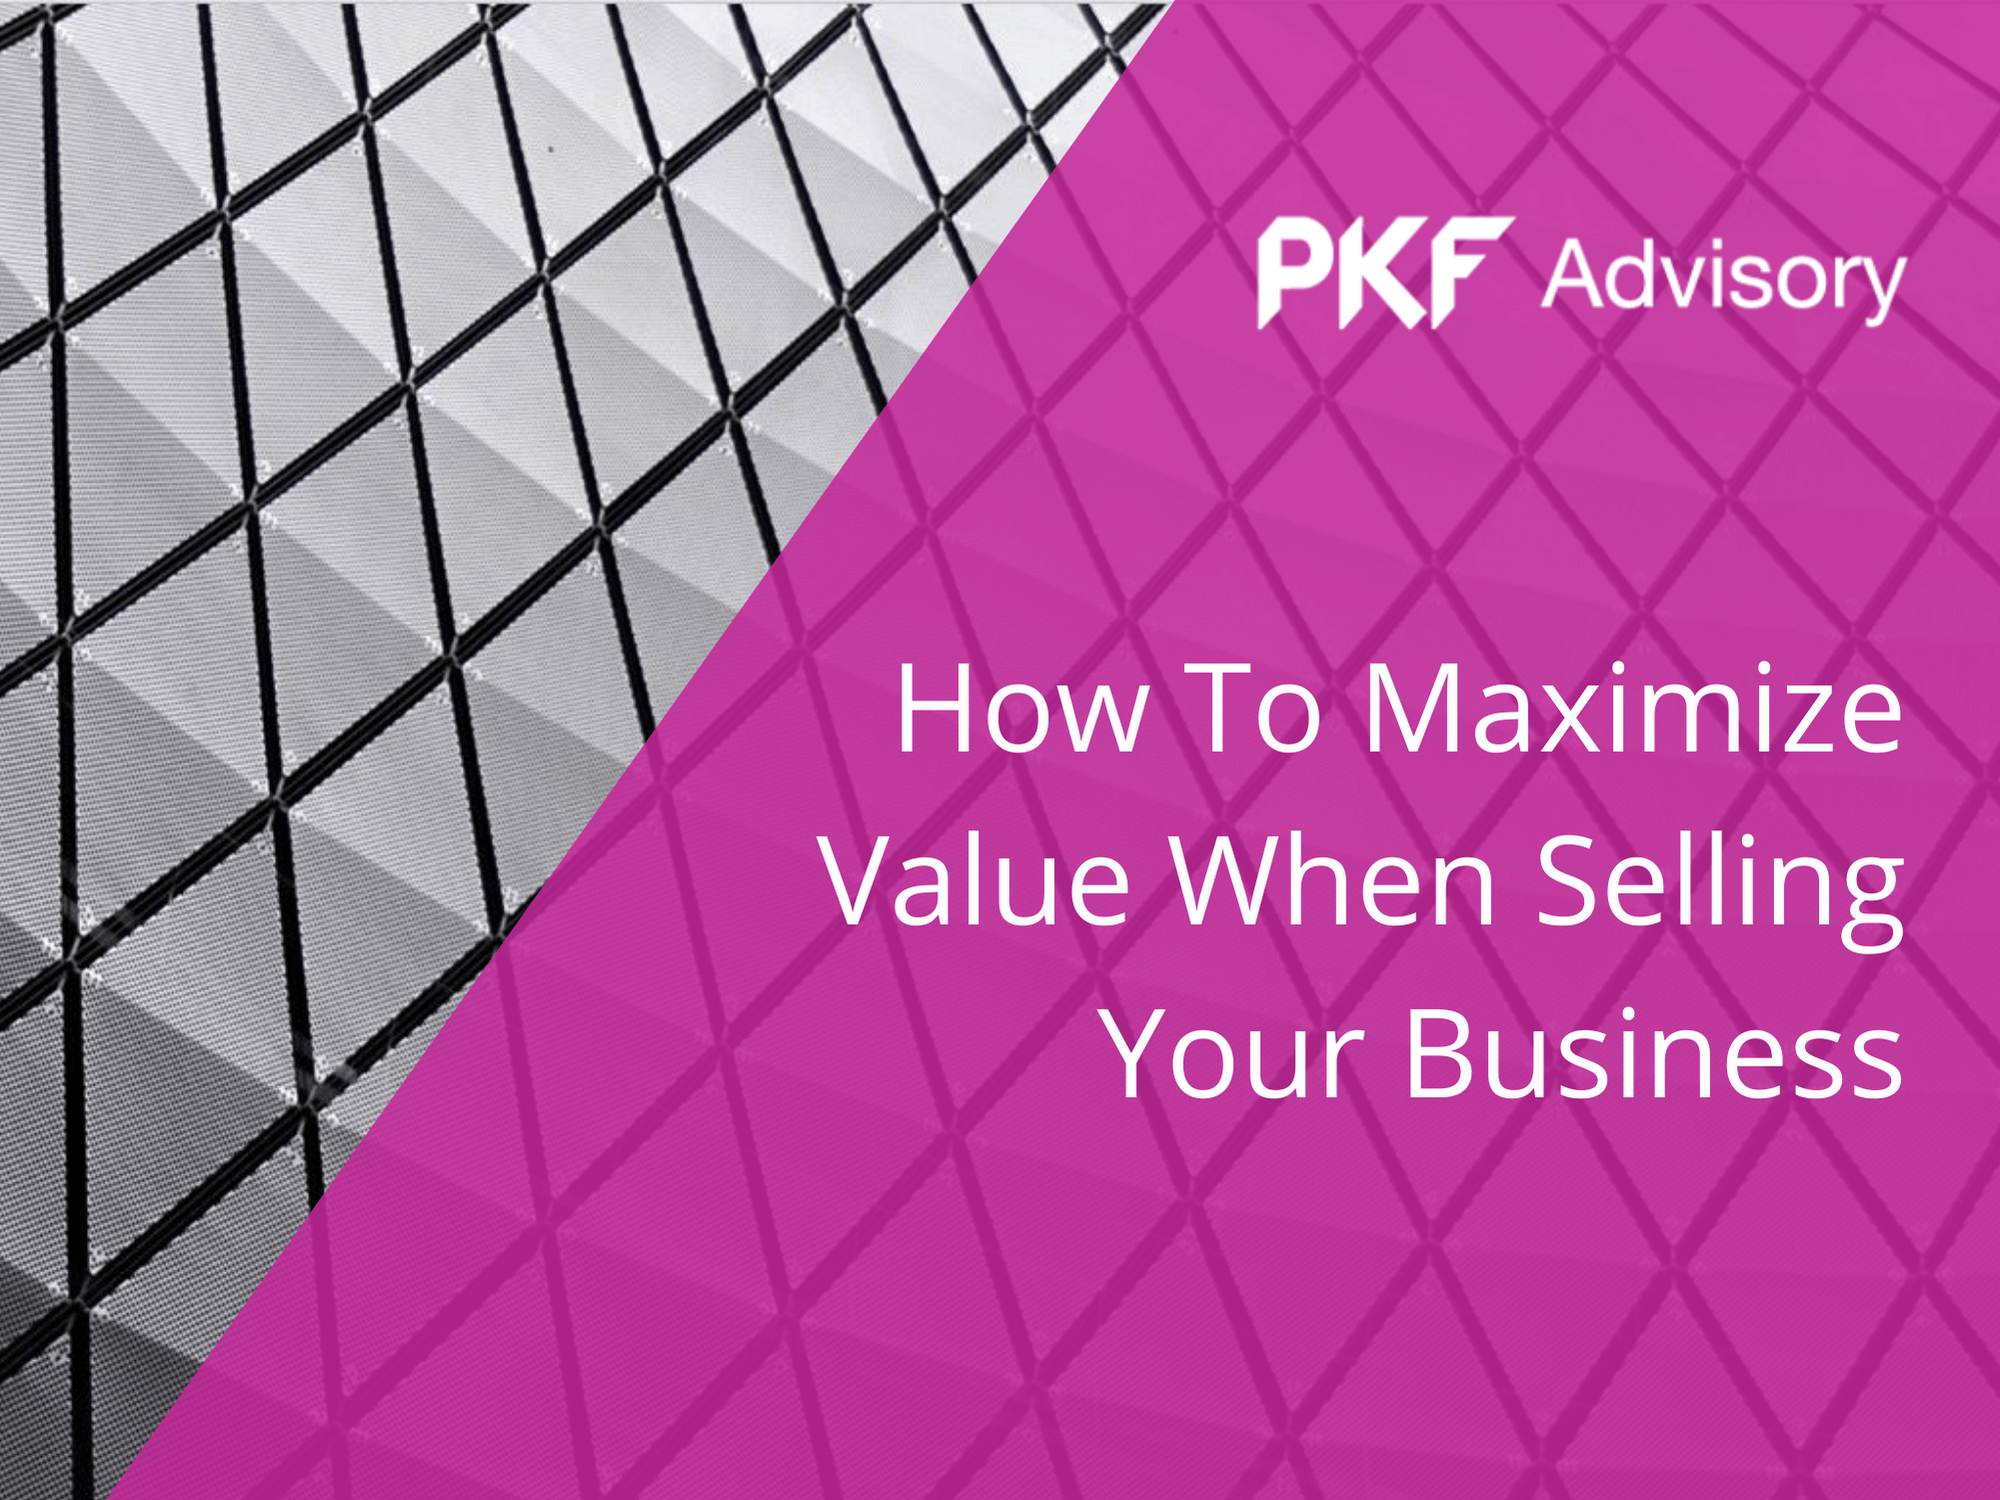 How to Maximize Value When Selling Your Business